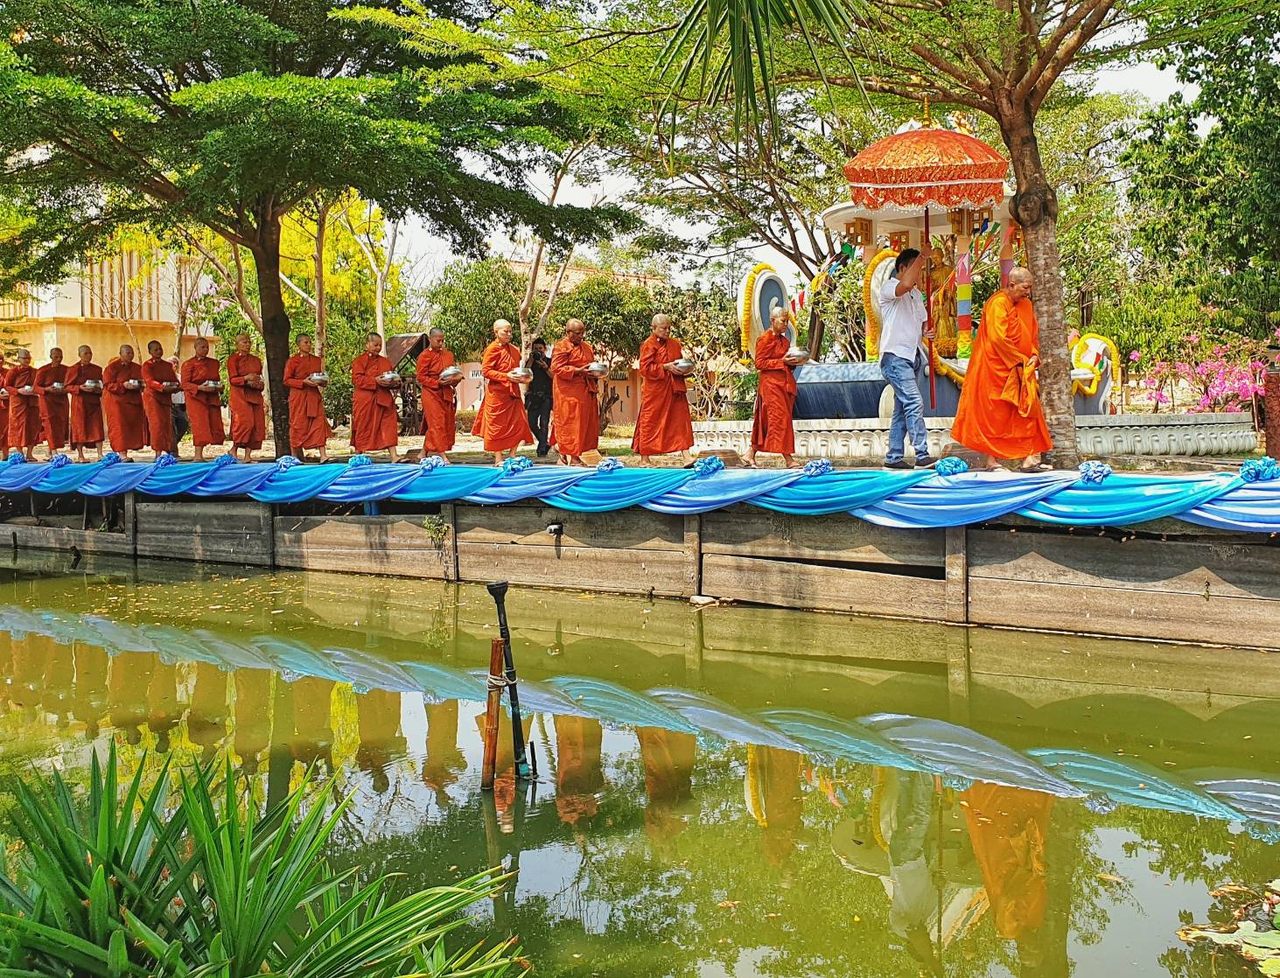 The monks collect alms in Nakhon Pathom province.
